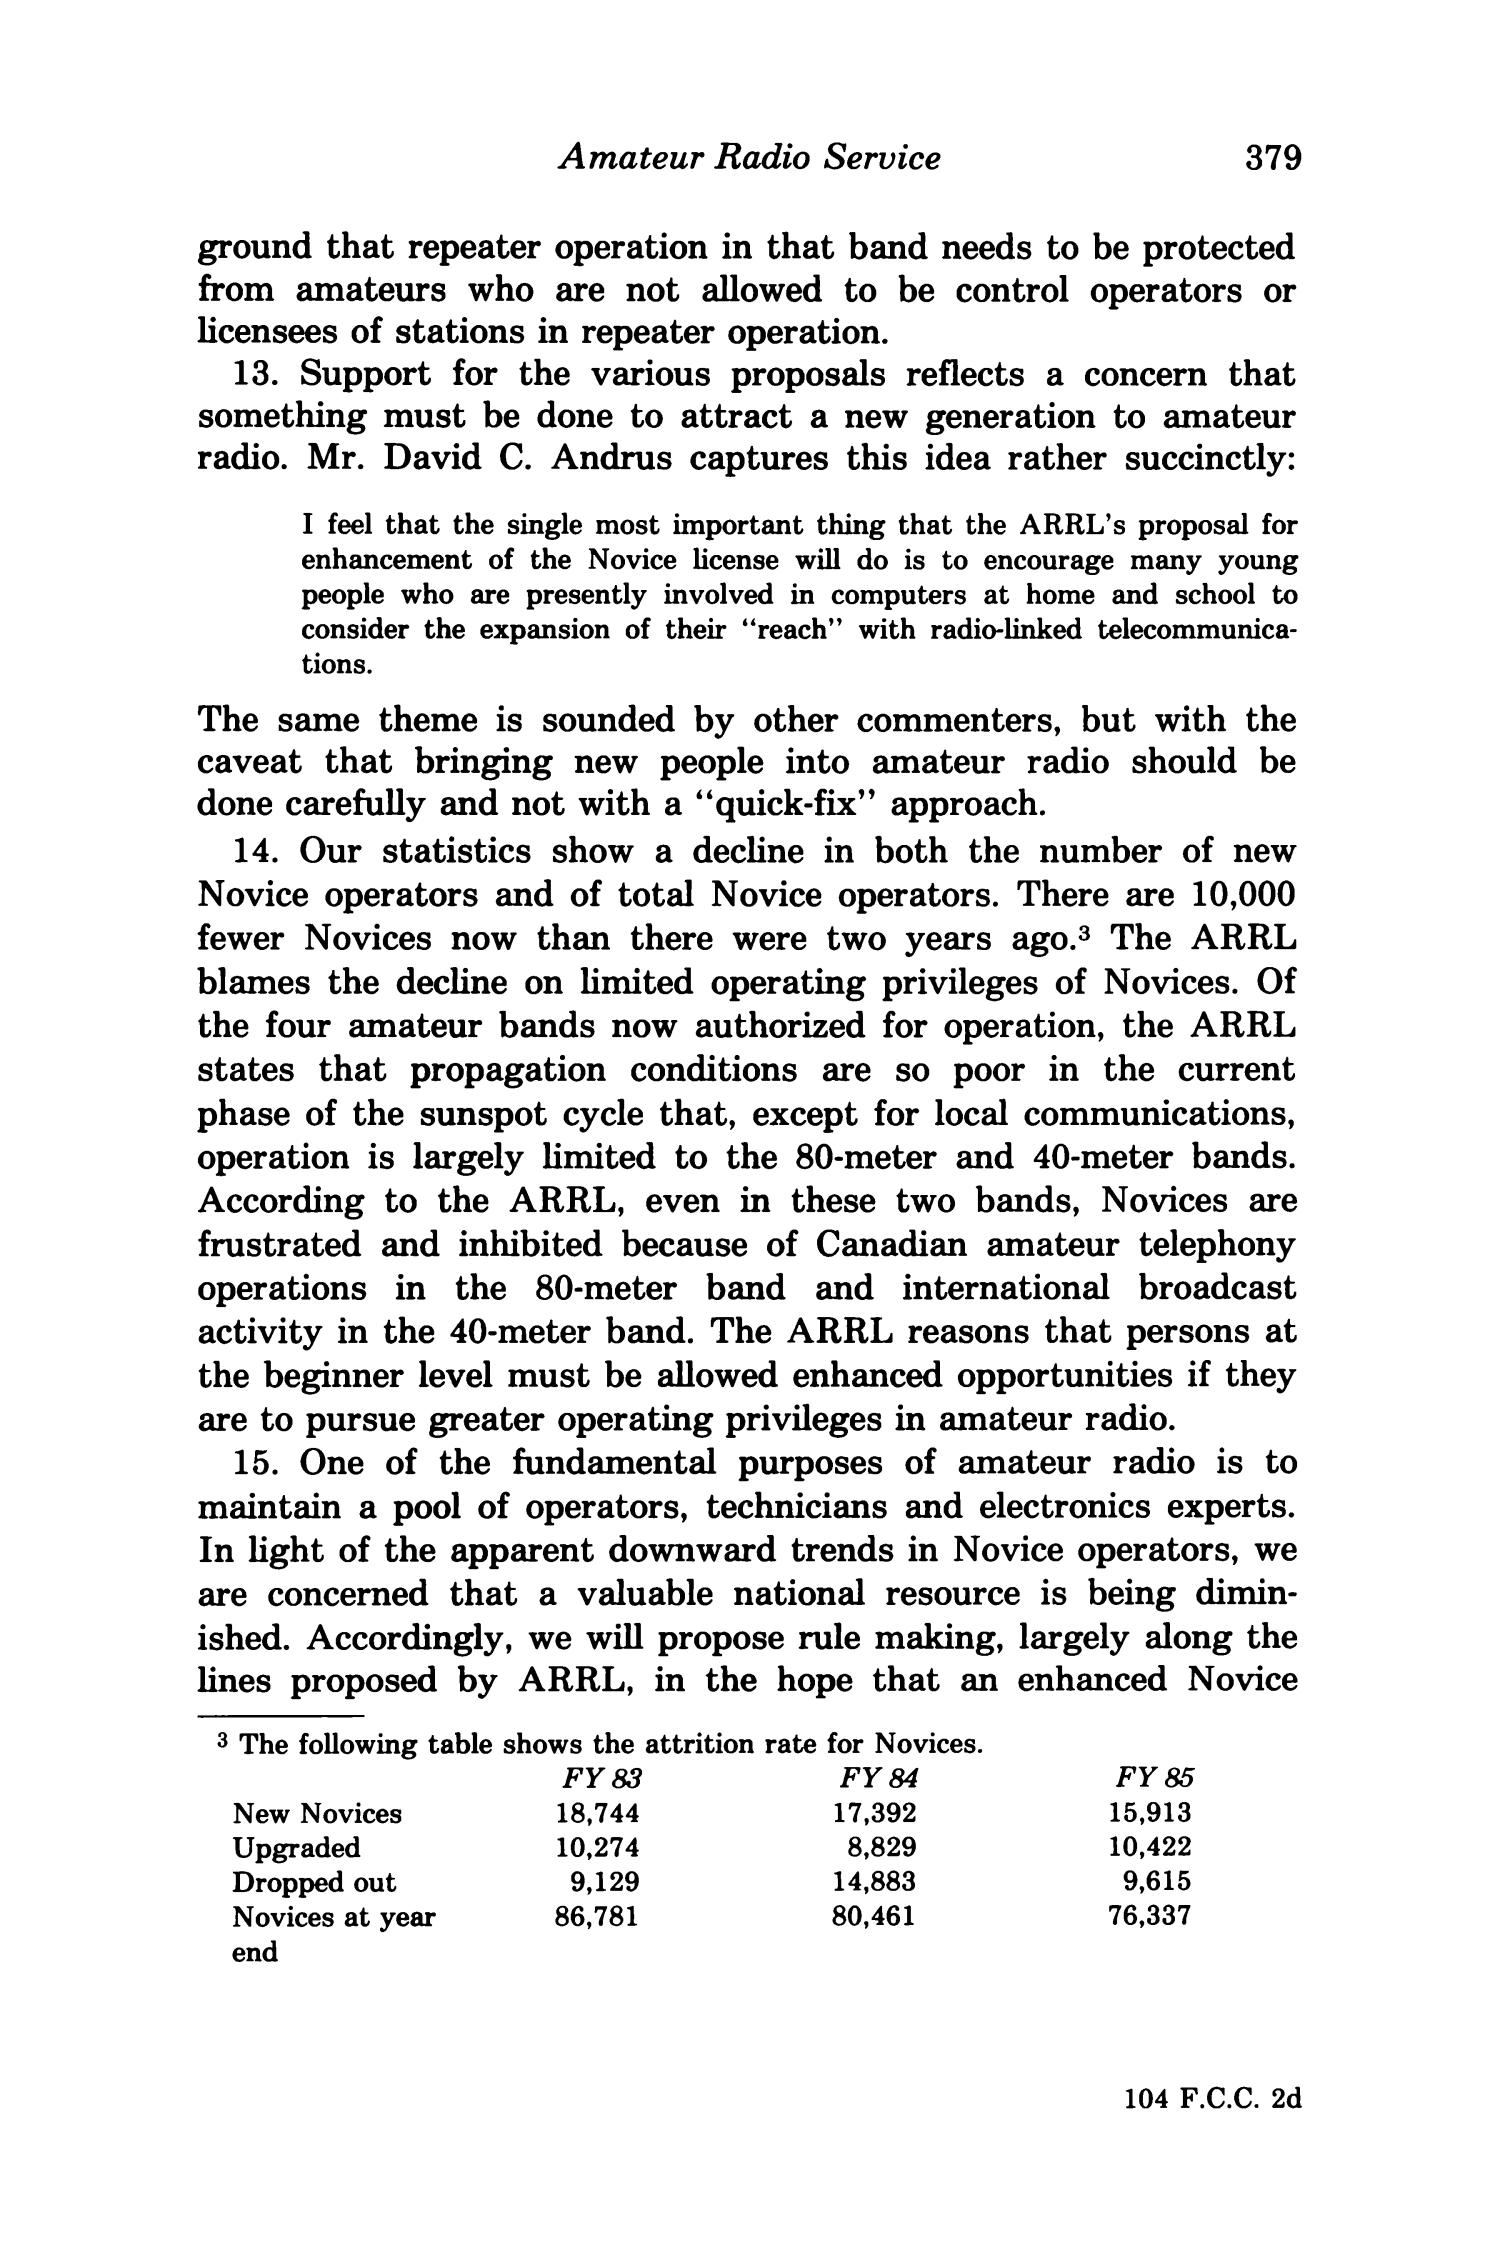 FCC Reports, Second Series, Volume 104, Number 2, Pages 375 to 719, August 1986
                                                
                                                    379
                                                